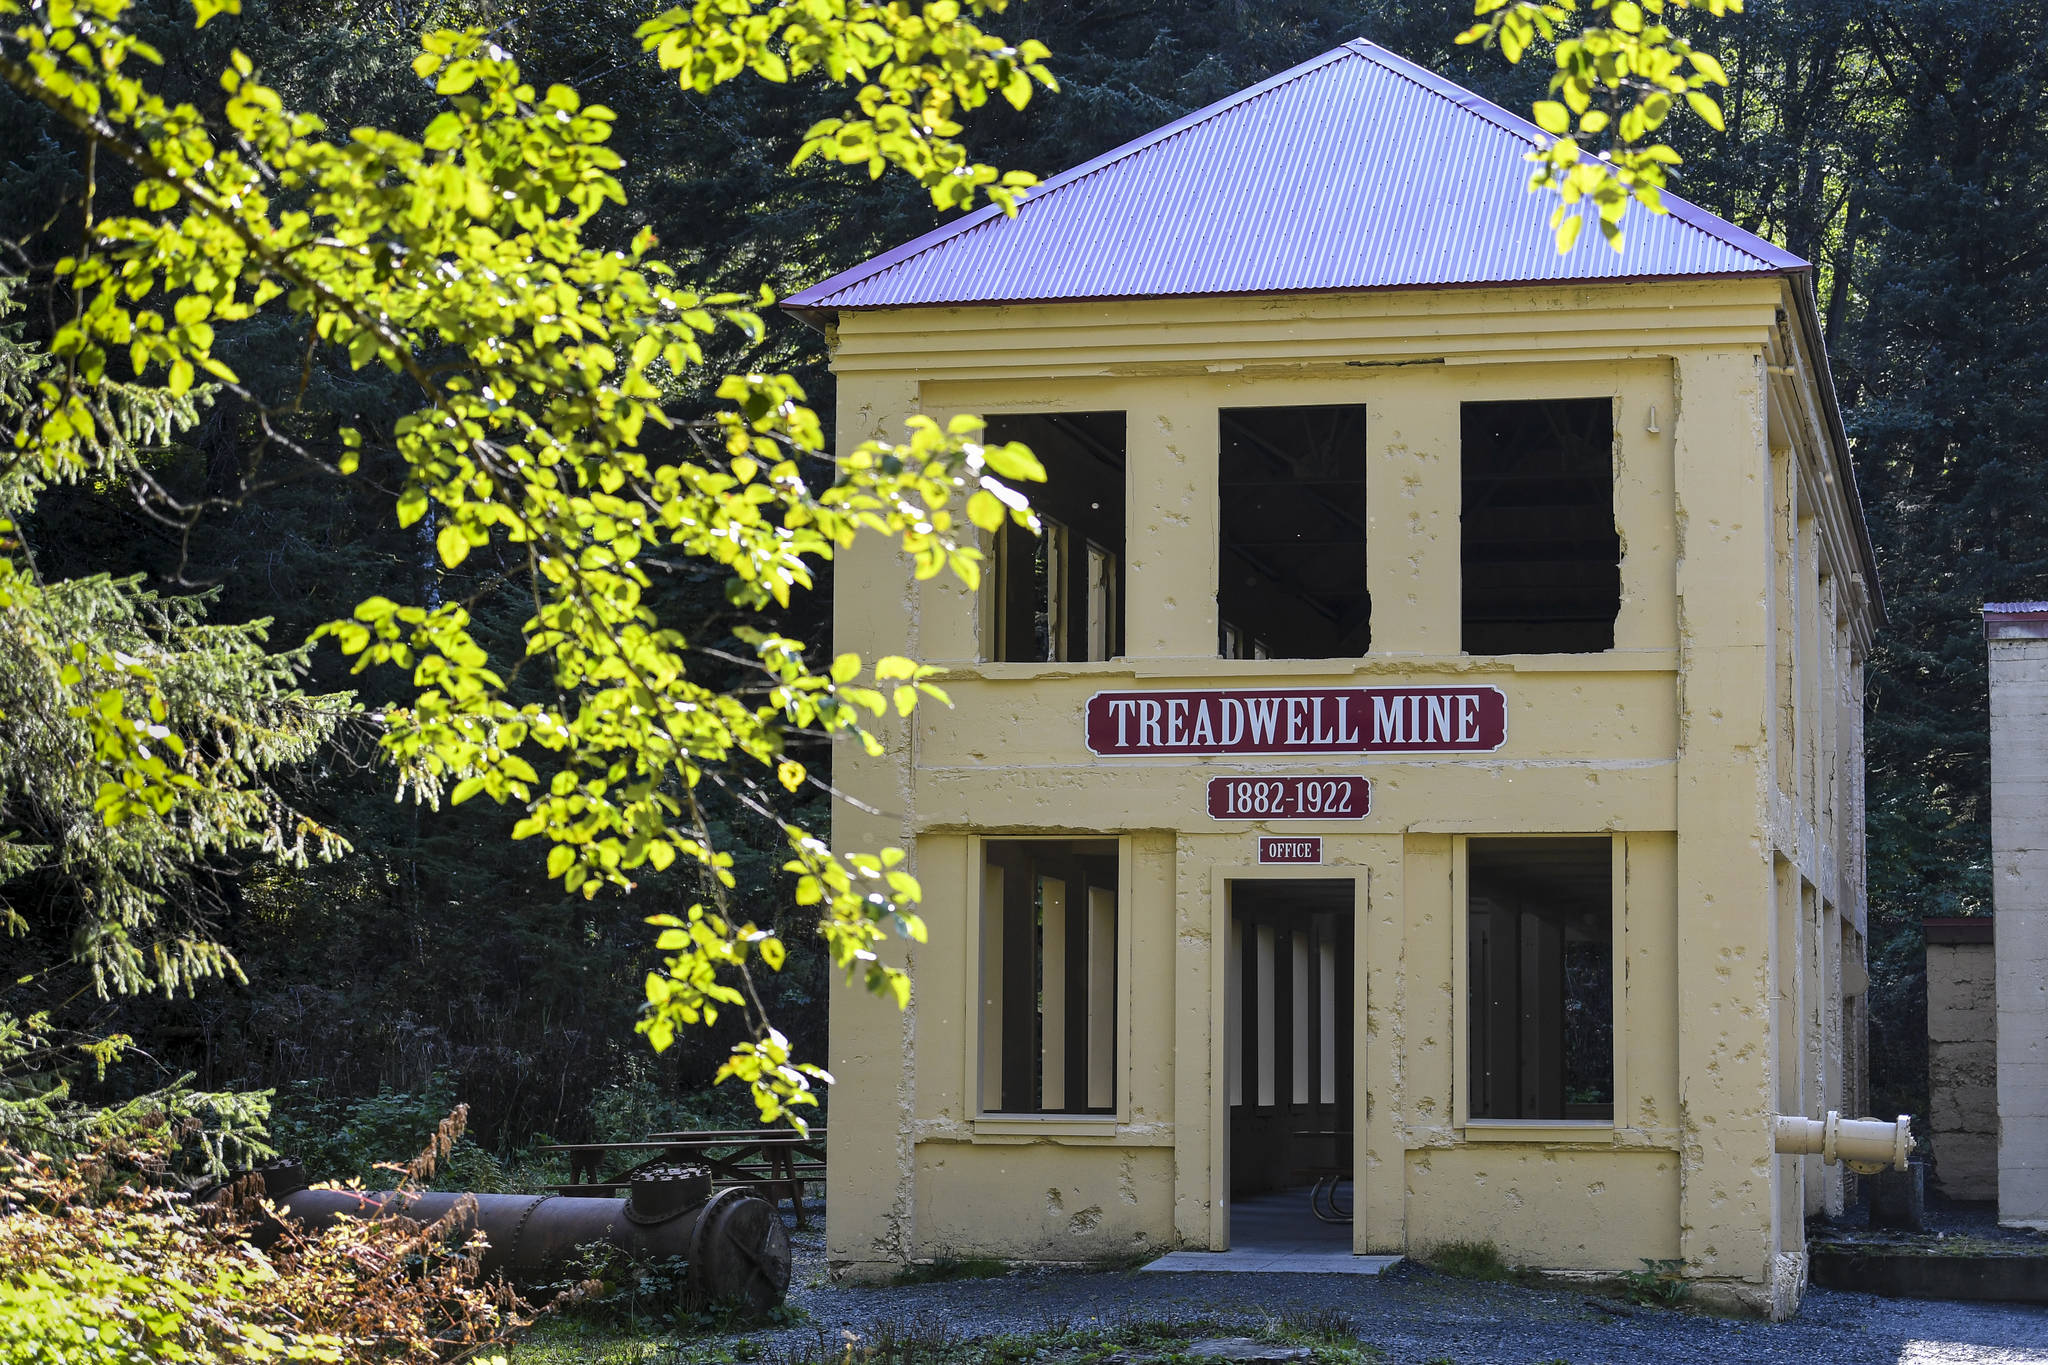 The “New Office Building” in the Treadwell Mine Historical Park on Tuesday, Sept. 17, 2019. The building was recently renovated by the Treadwell Historic Preservation and Restoration Society, Inc. (Michael Penn | Juneau Empire)